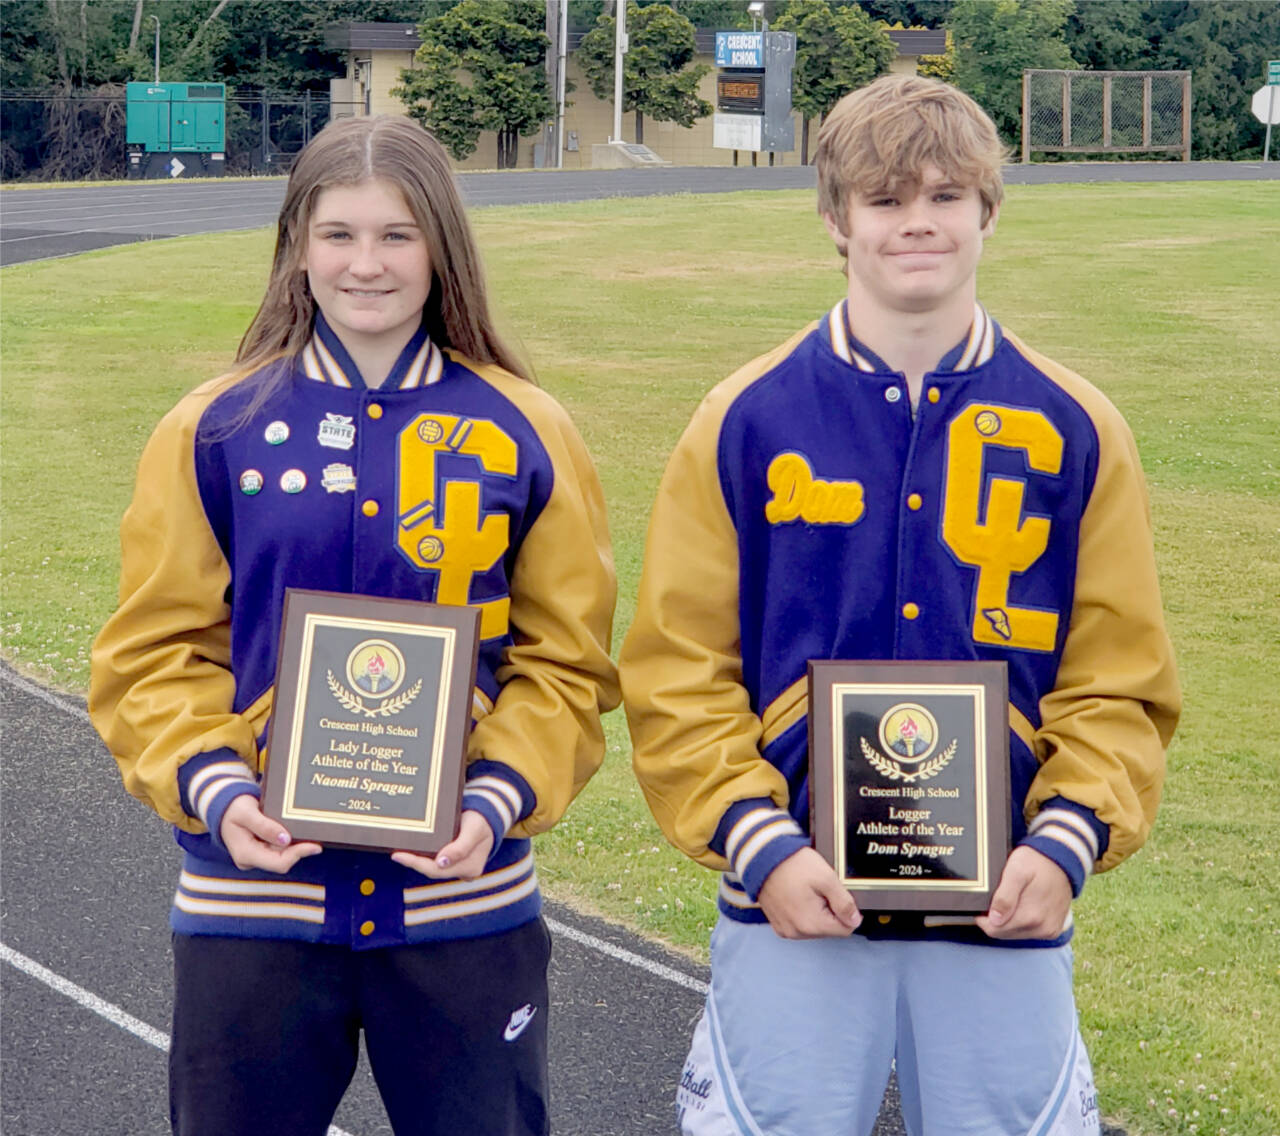 Siblings Naomii and Dom Sprague were named the Crescent Loggers Athletes of the Year. Naomii competed in volleyball, basketball and track for the Loggers while Dom plays football, basketball and track. (Crescent High School)